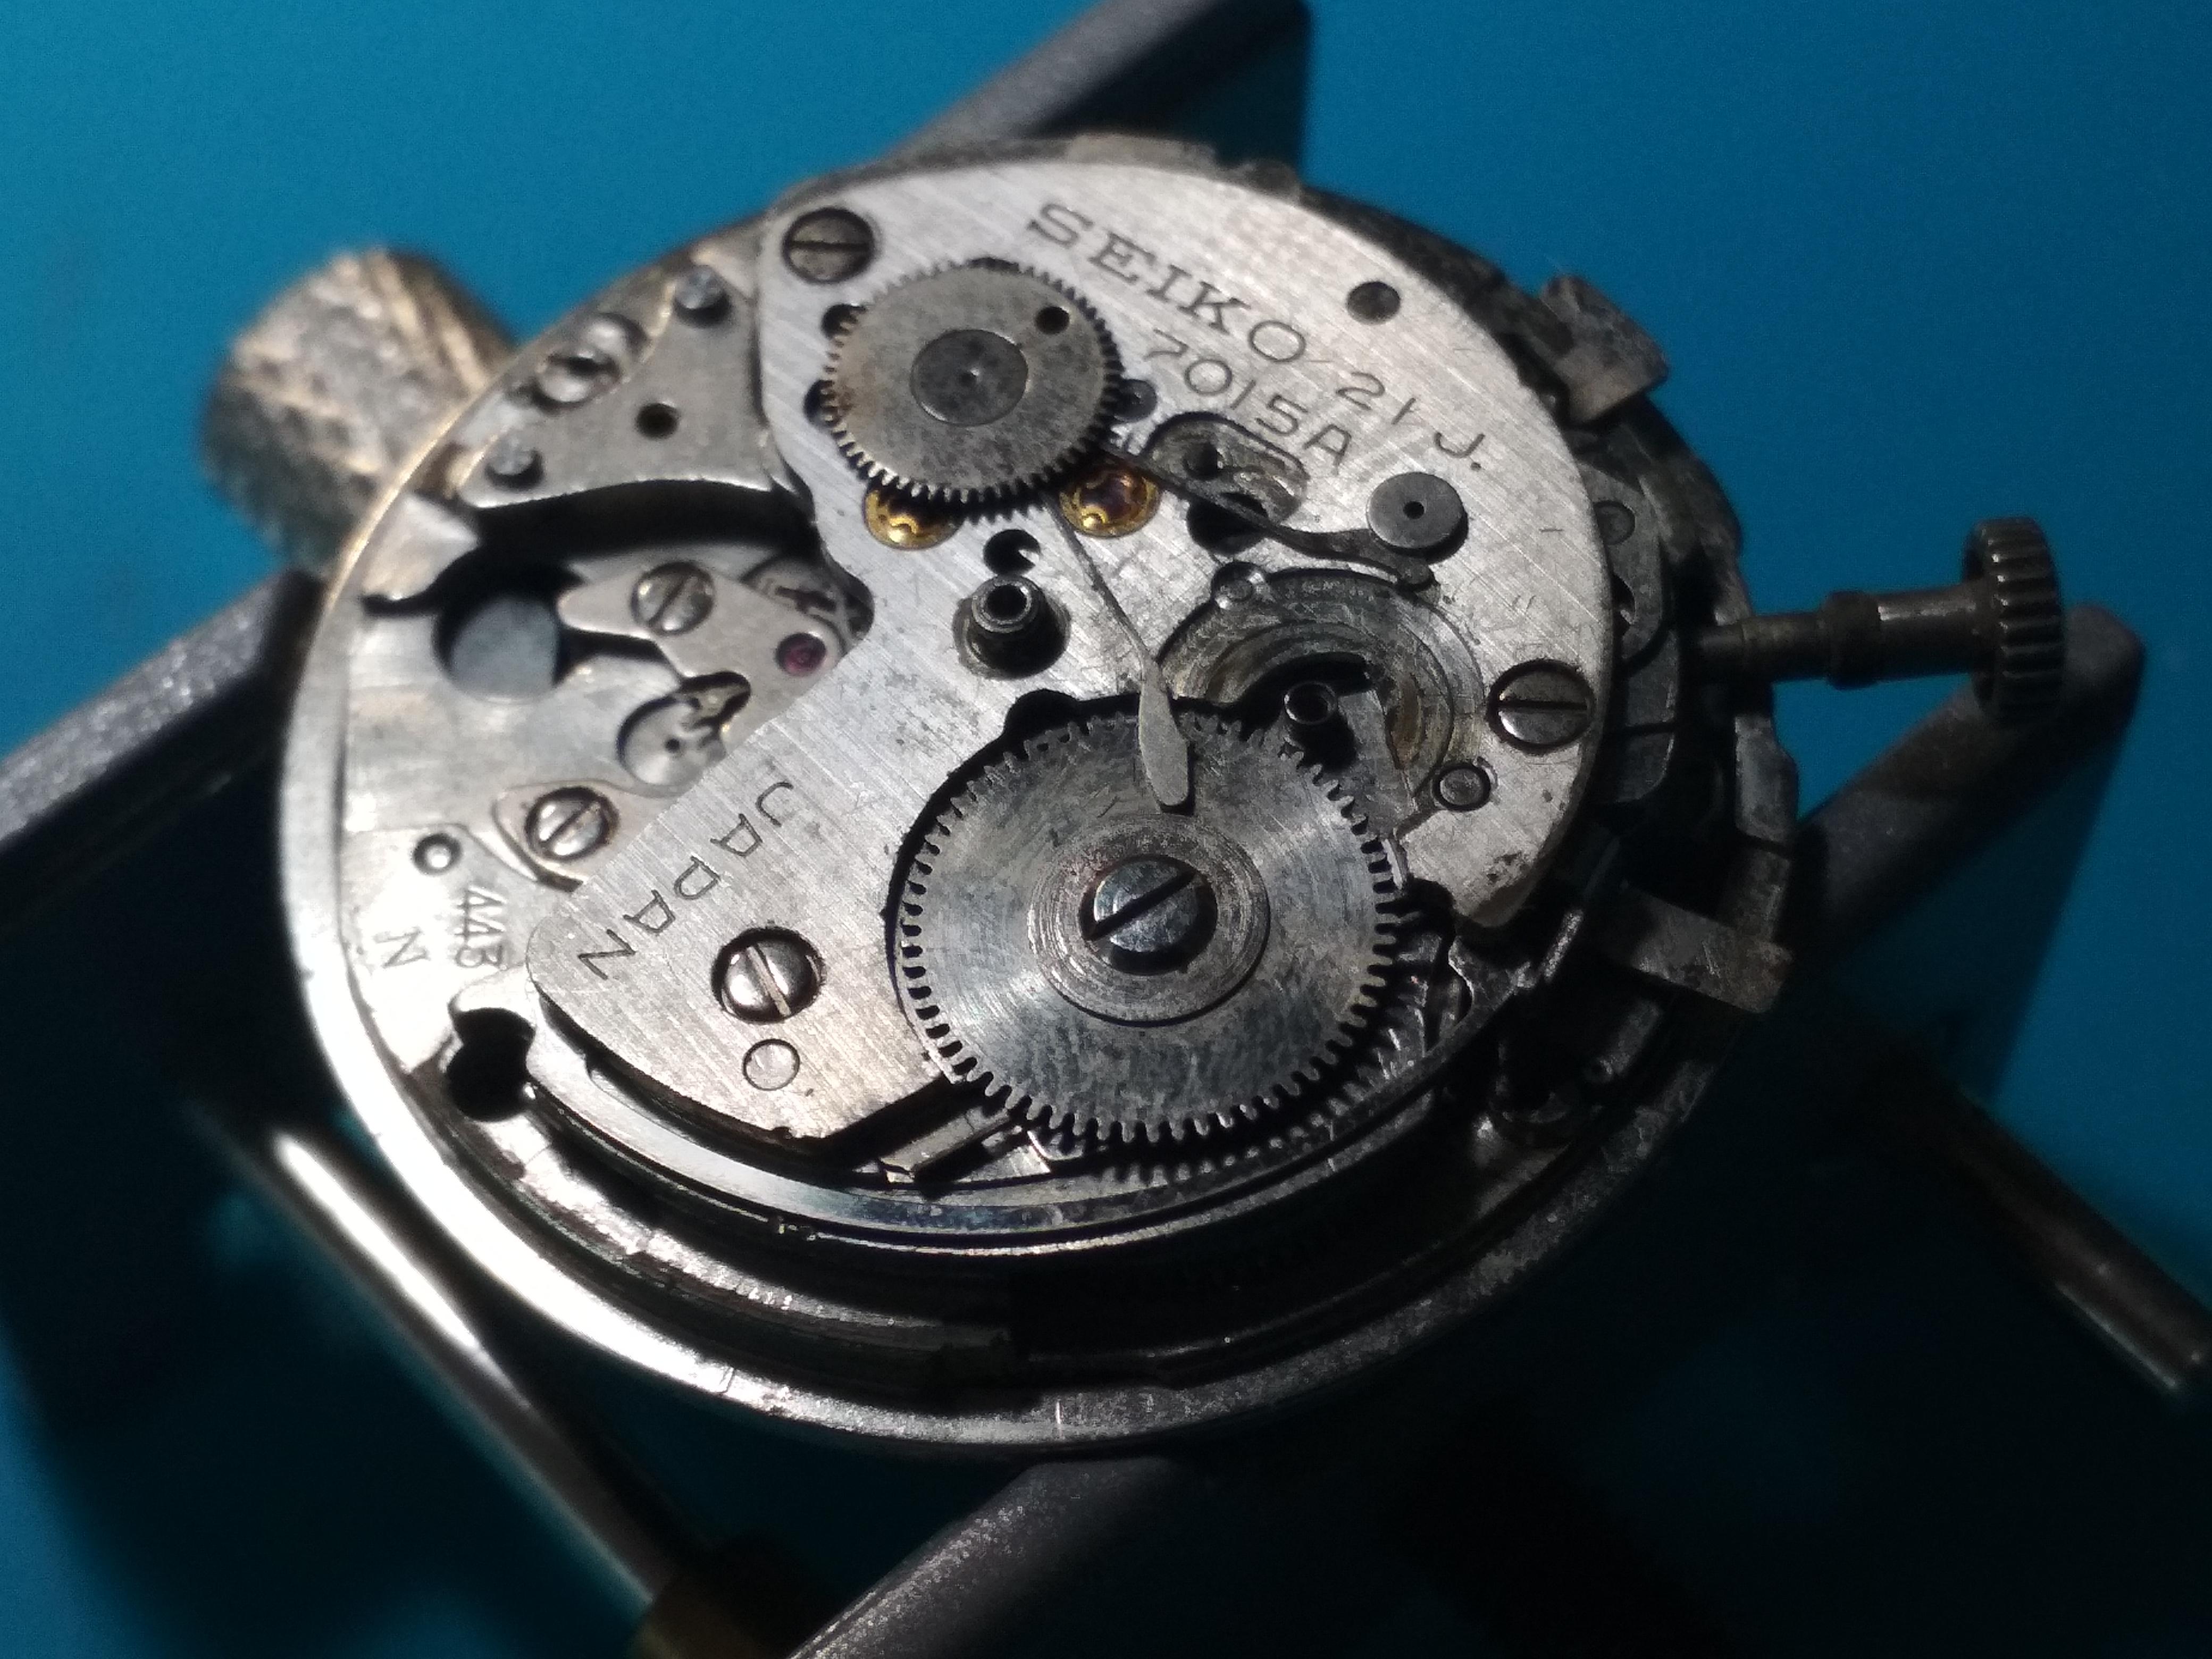 Seiko 7015-8000 restoration project - Your Walkthroughs and Techniques -  Watch Repair Talk